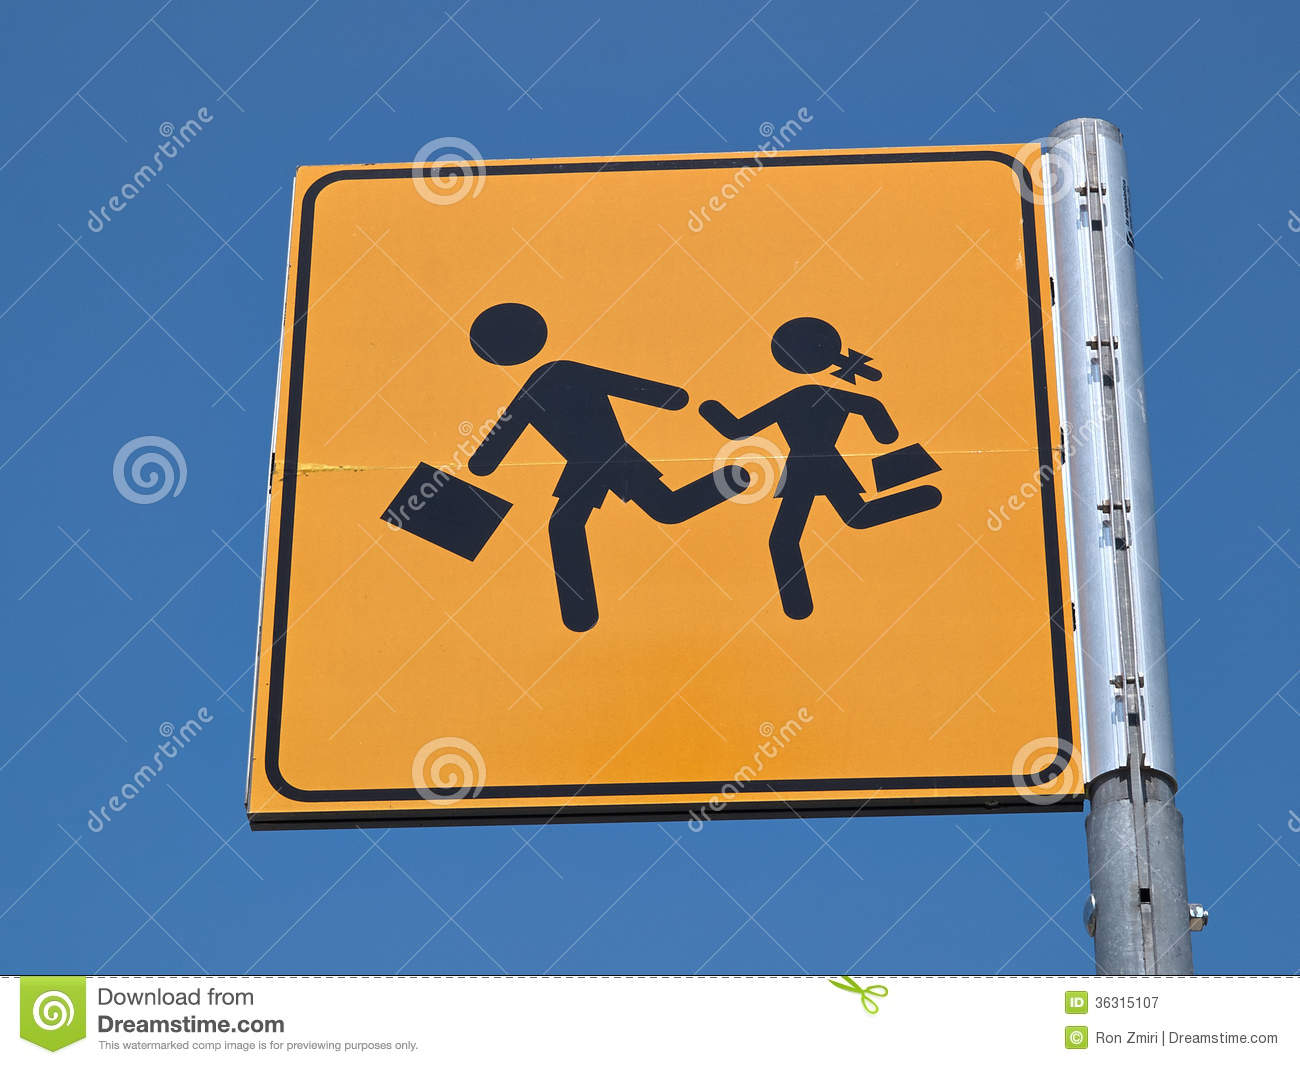 Children Crossing Street Sign Royalty Free Stock Photography   Image